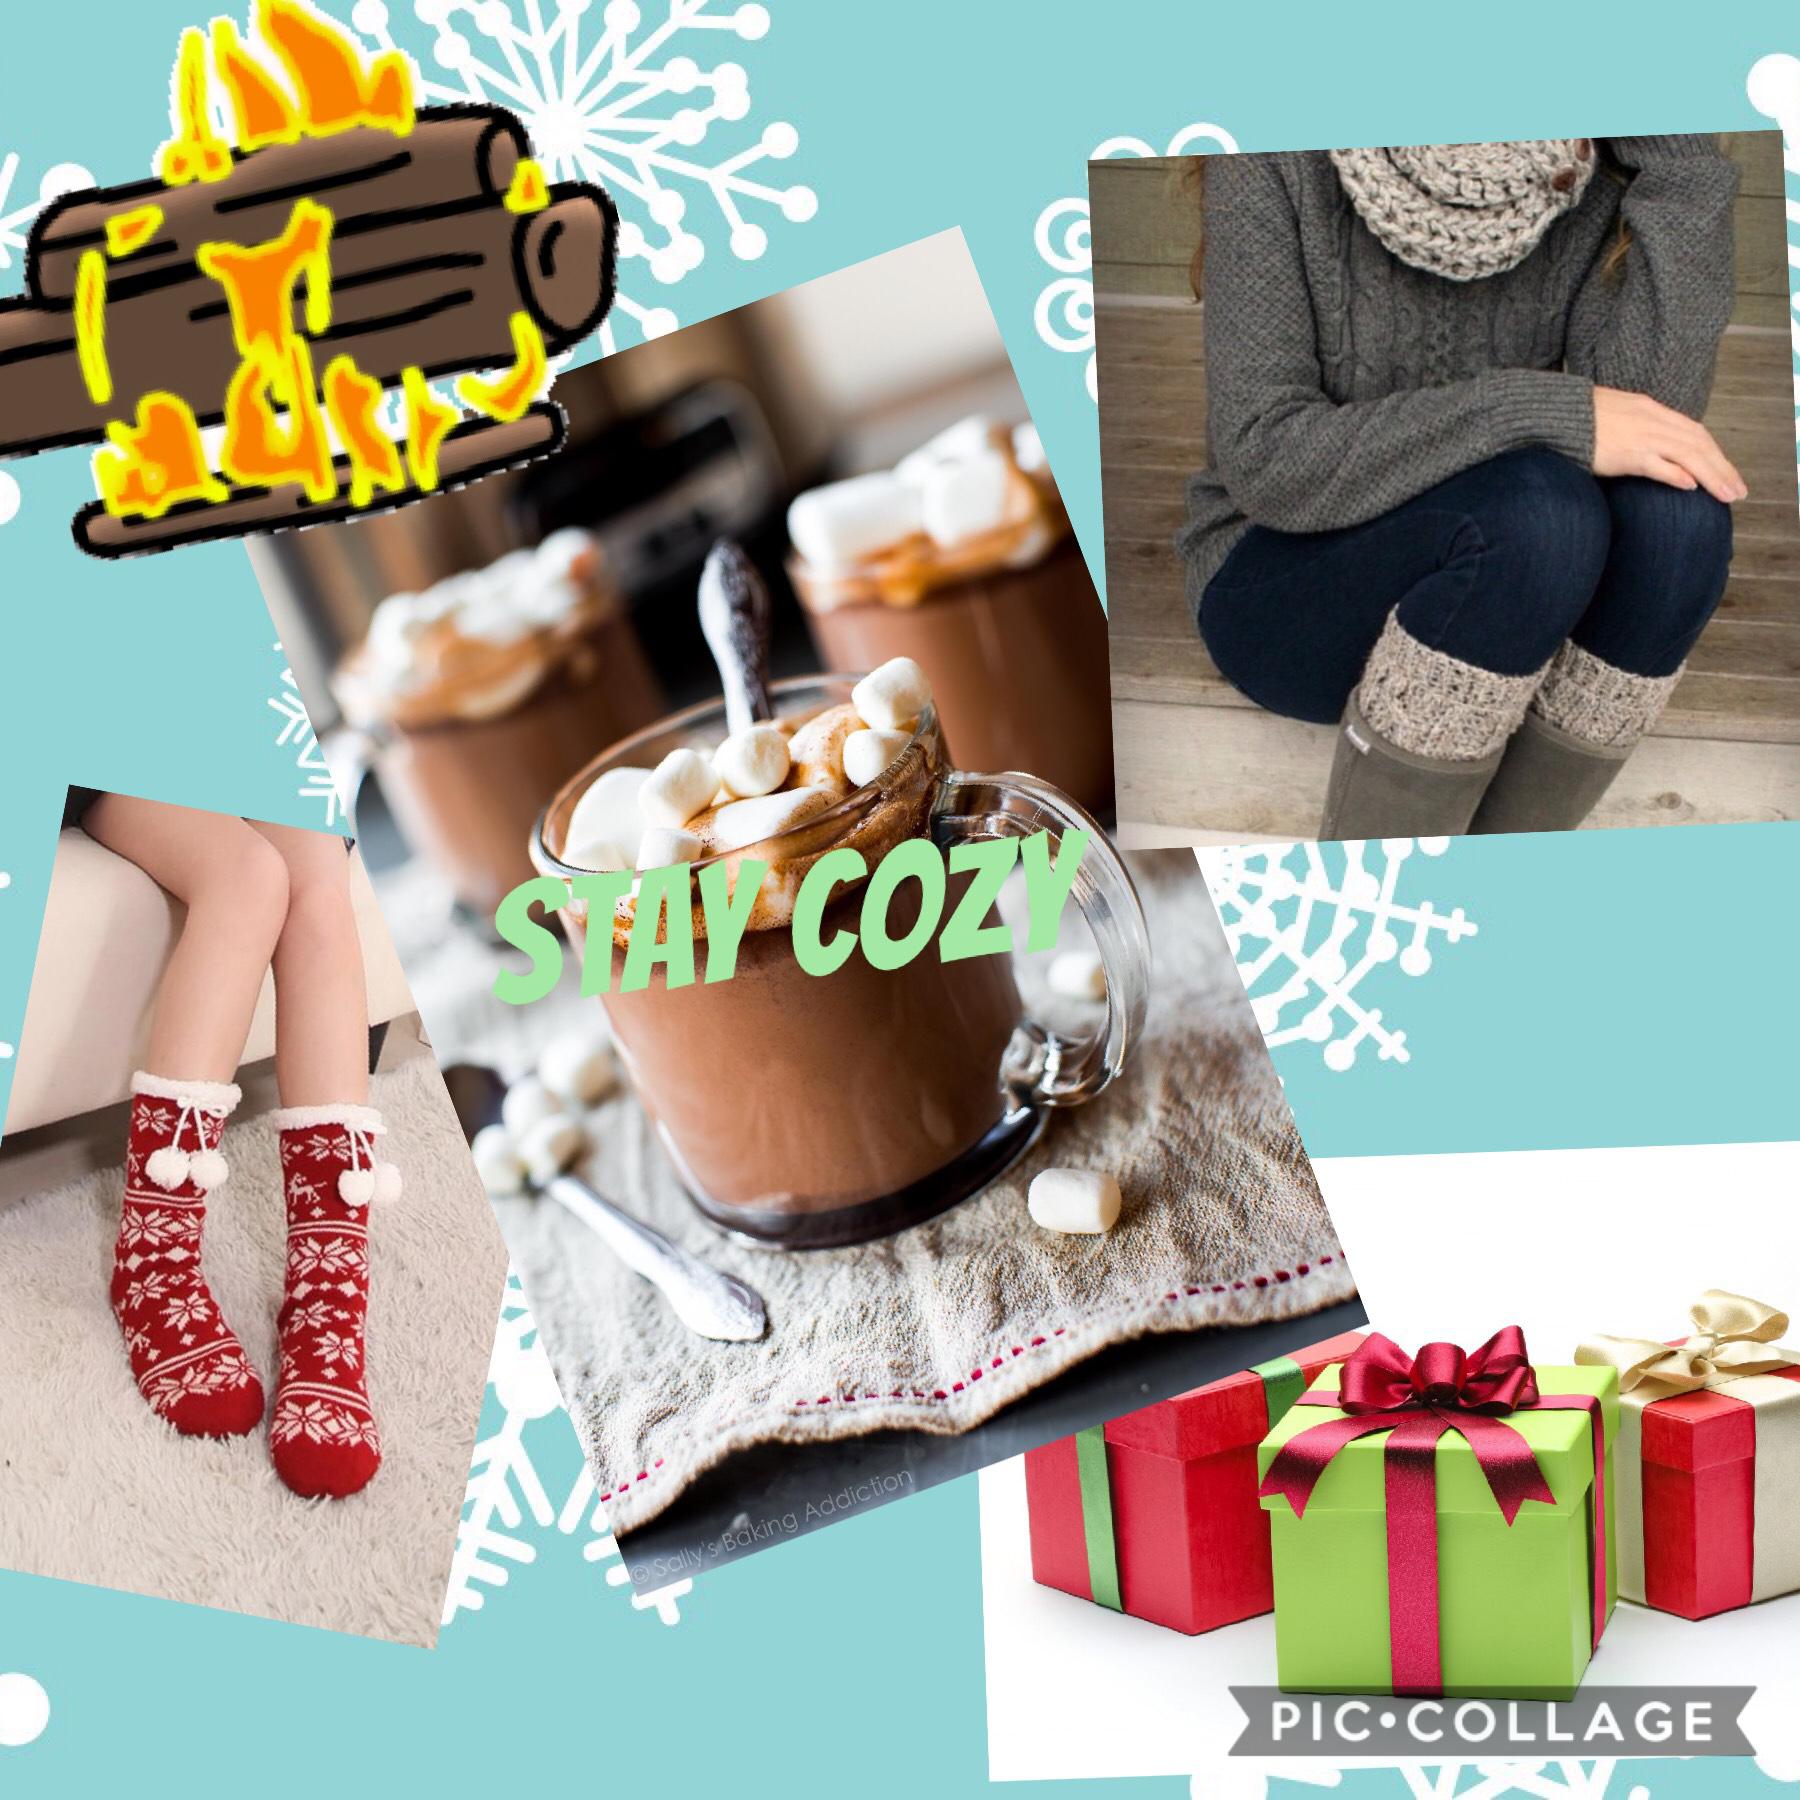 Yay! Stay cozy and warm with this collage! These are all the things u need for winter! Stay cozy!